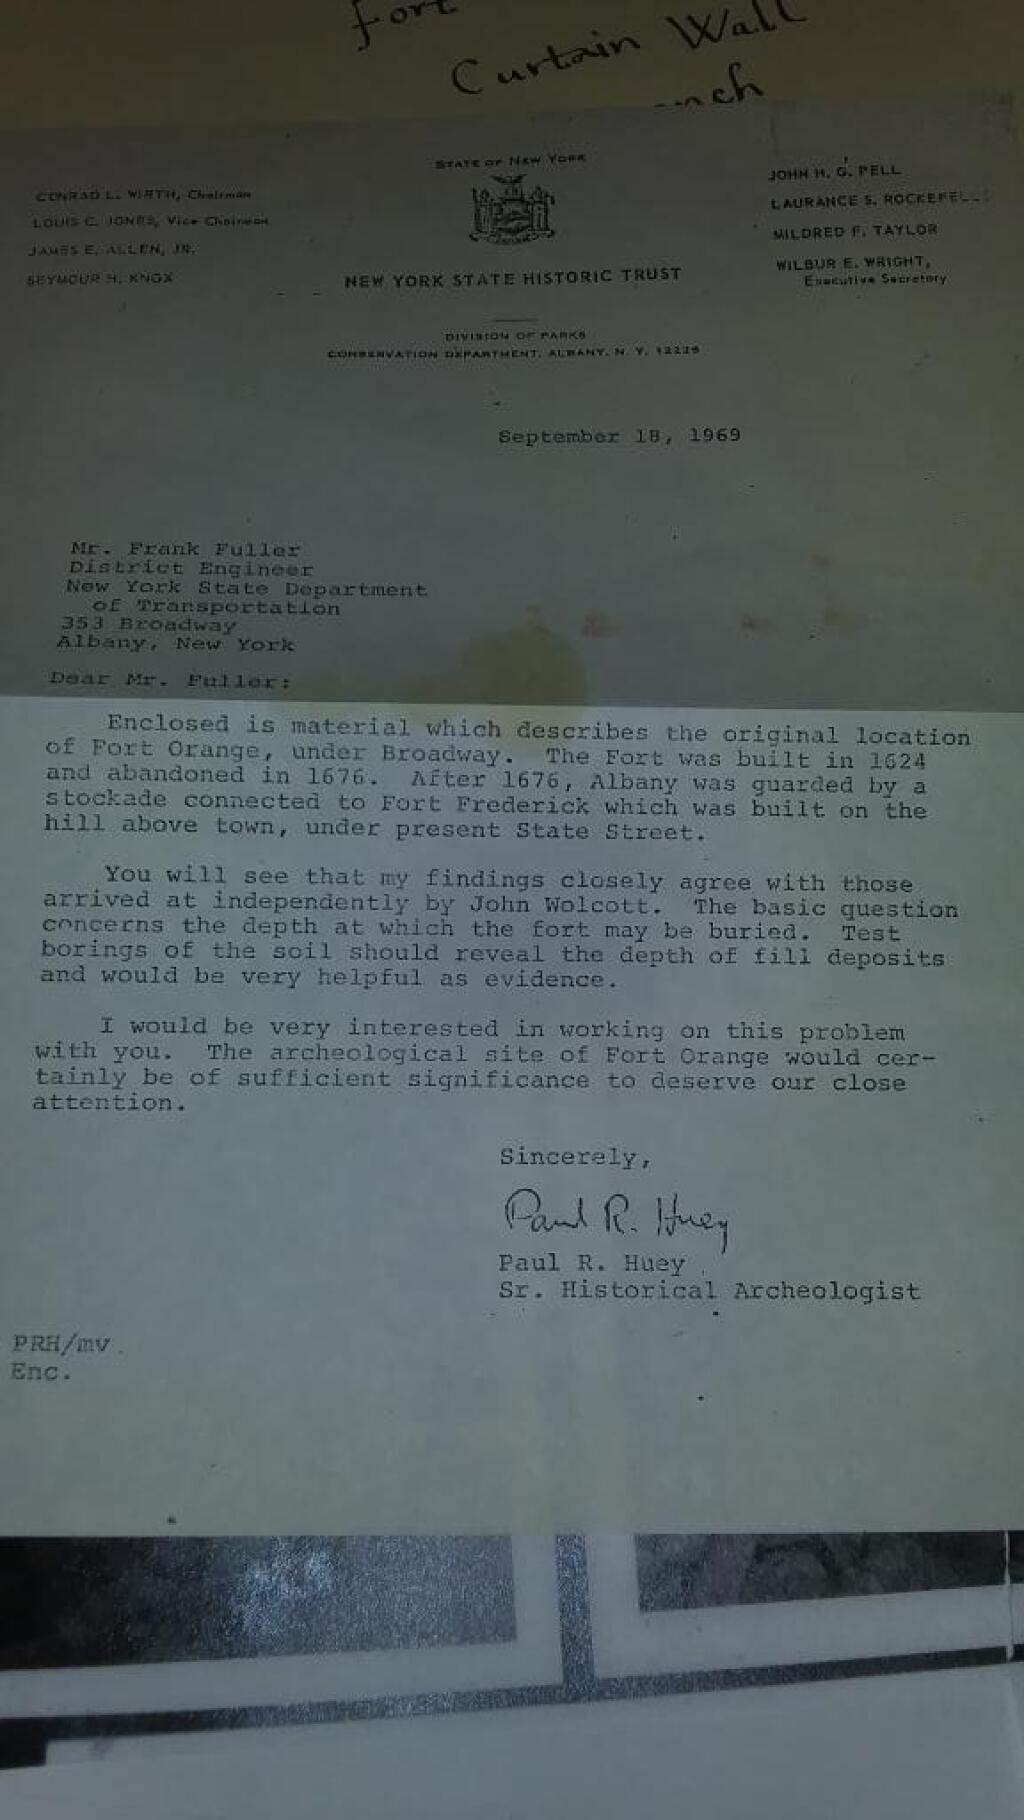 The Fake Letter of Paul Huey